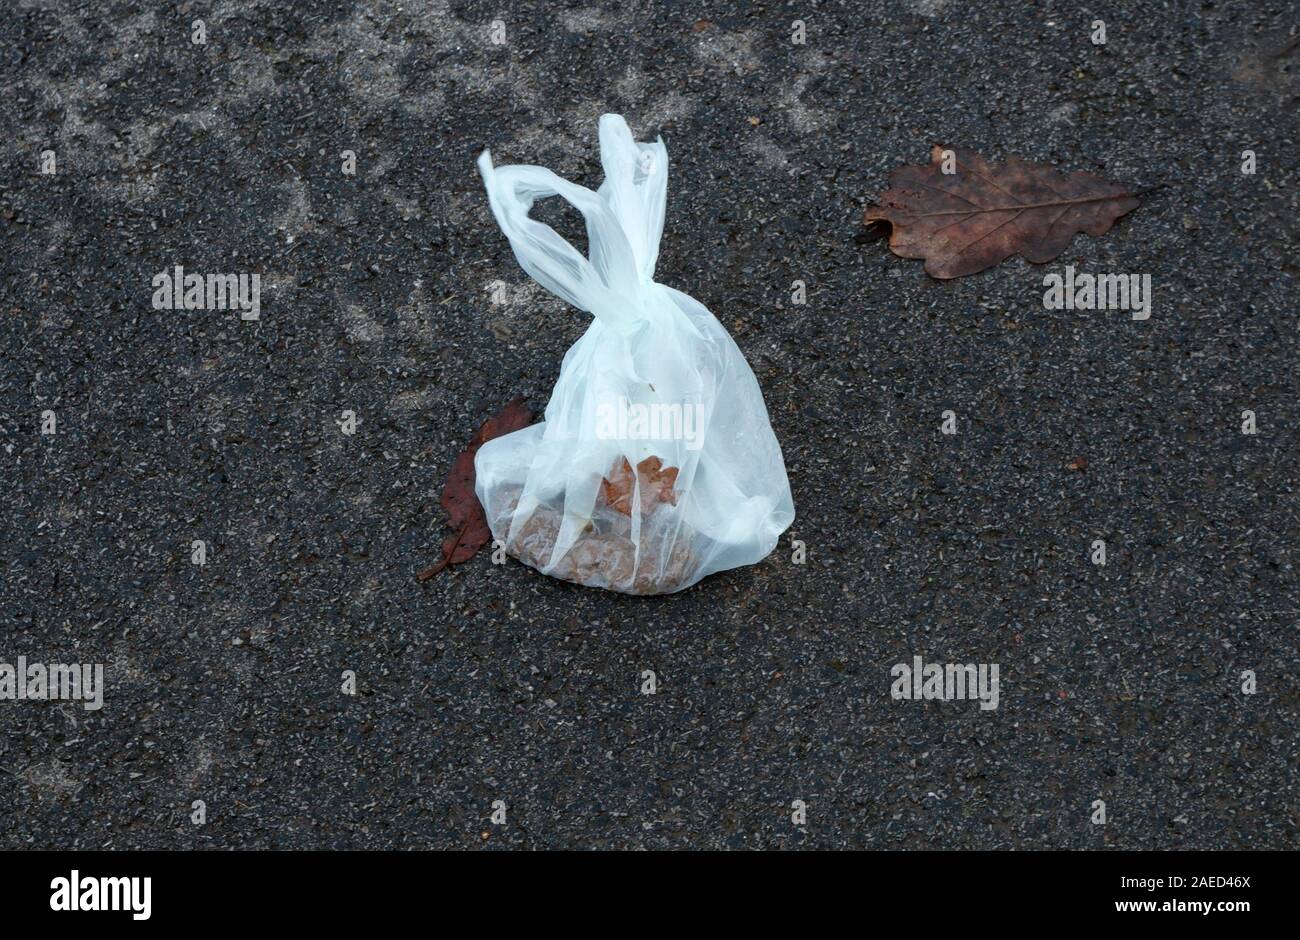 Discarded plastic bag with dog waste on road side, UK Stock Photo